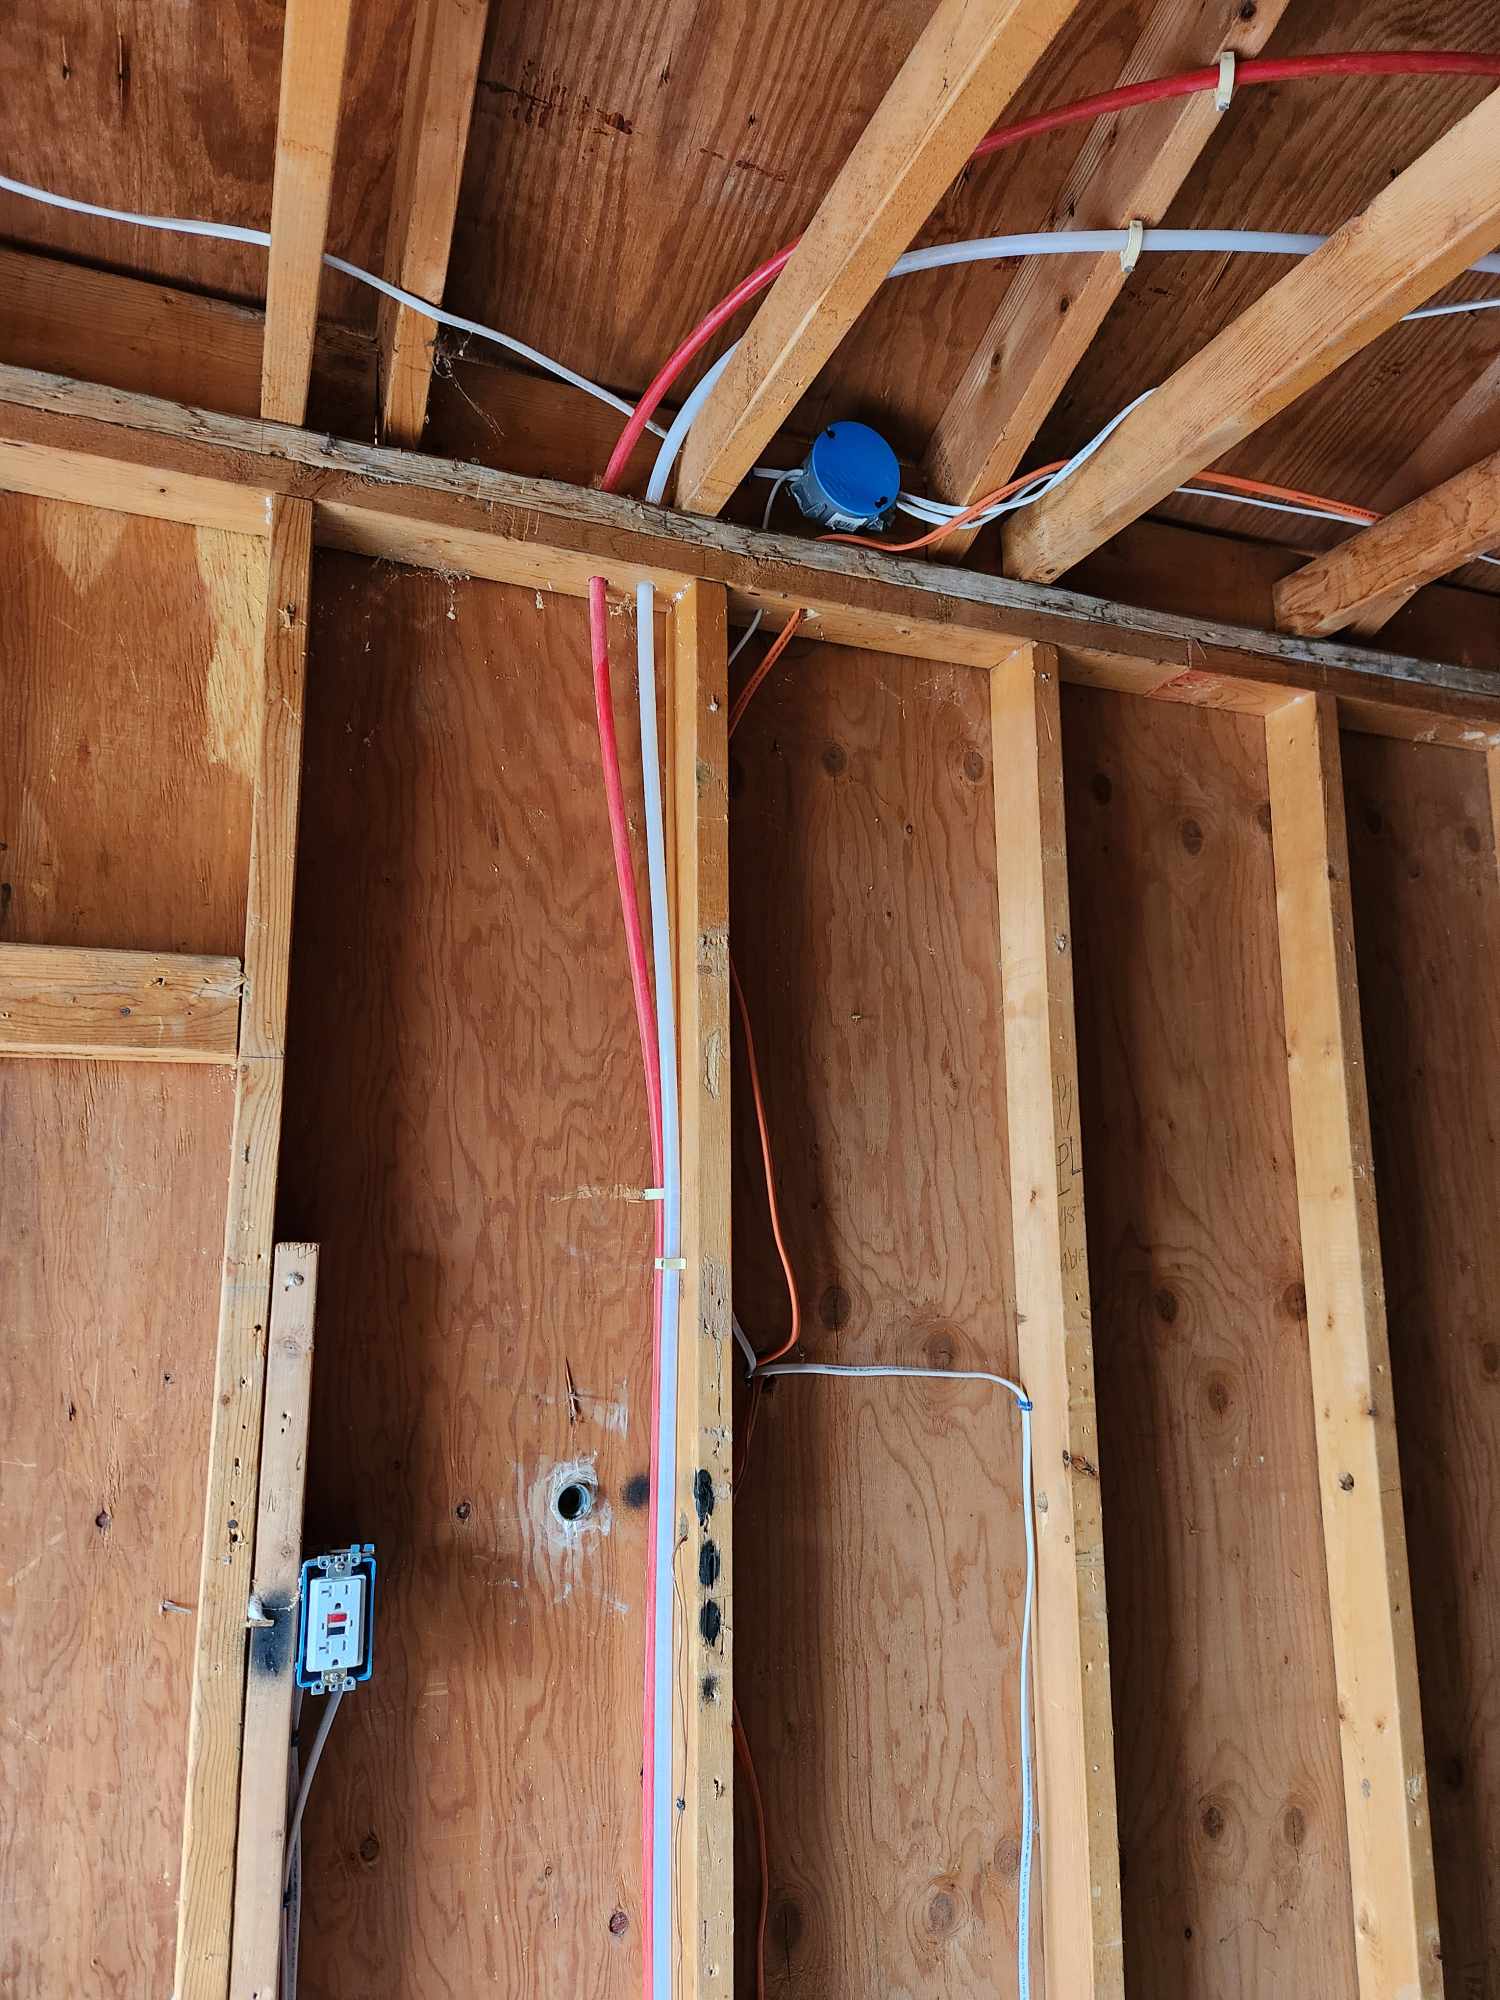 Residential Electrical Work